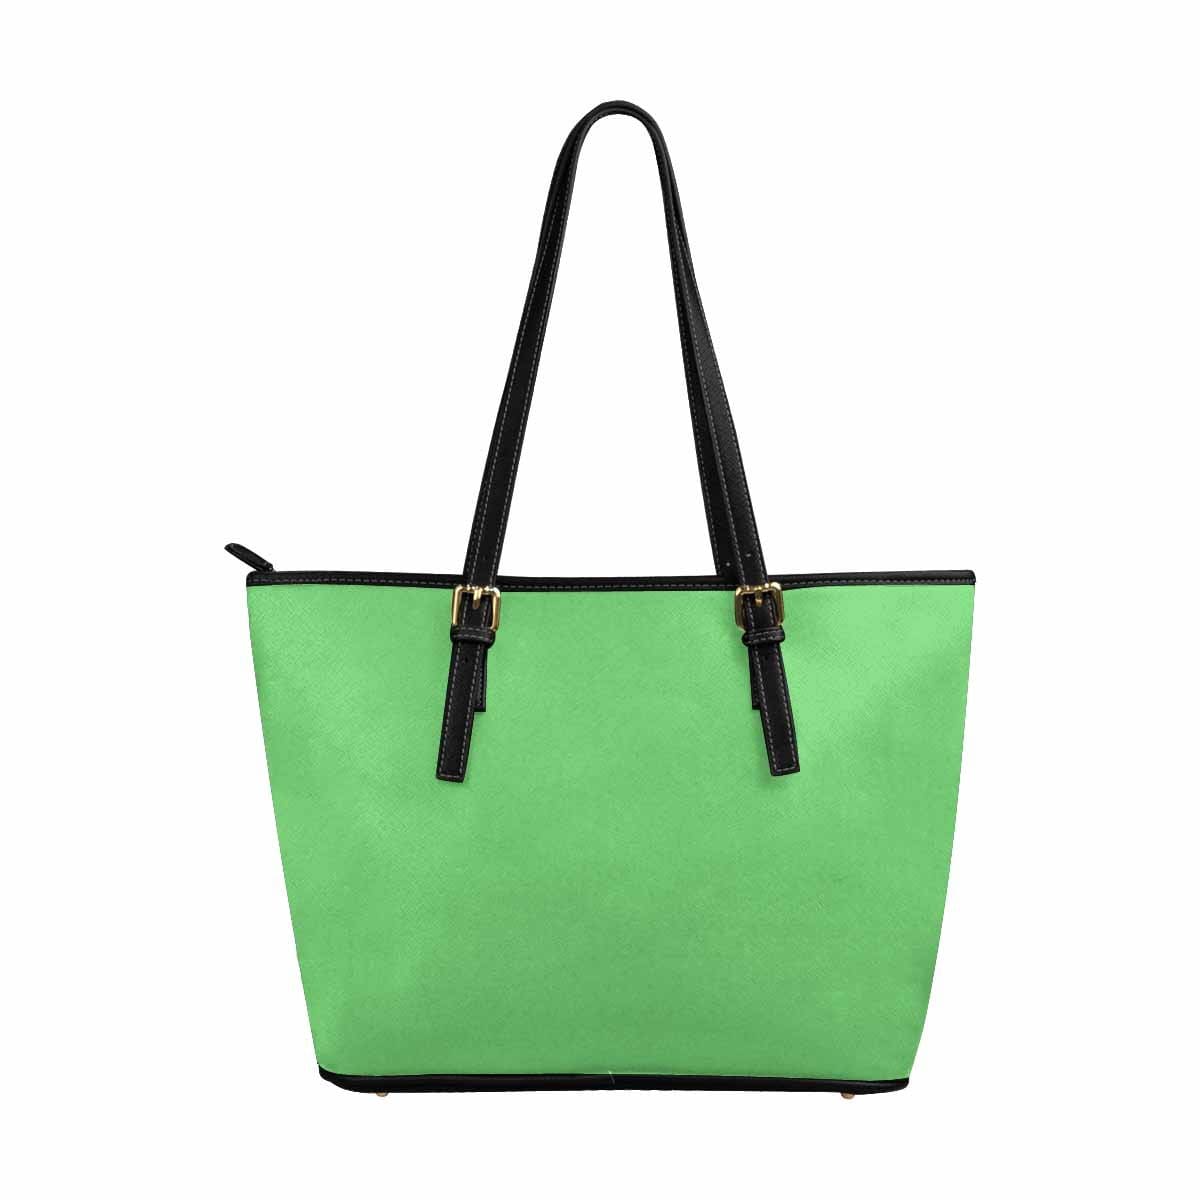 Large Leather Tote Shoulder Bag - Pastel Green - Bags | Leather Tote Bags